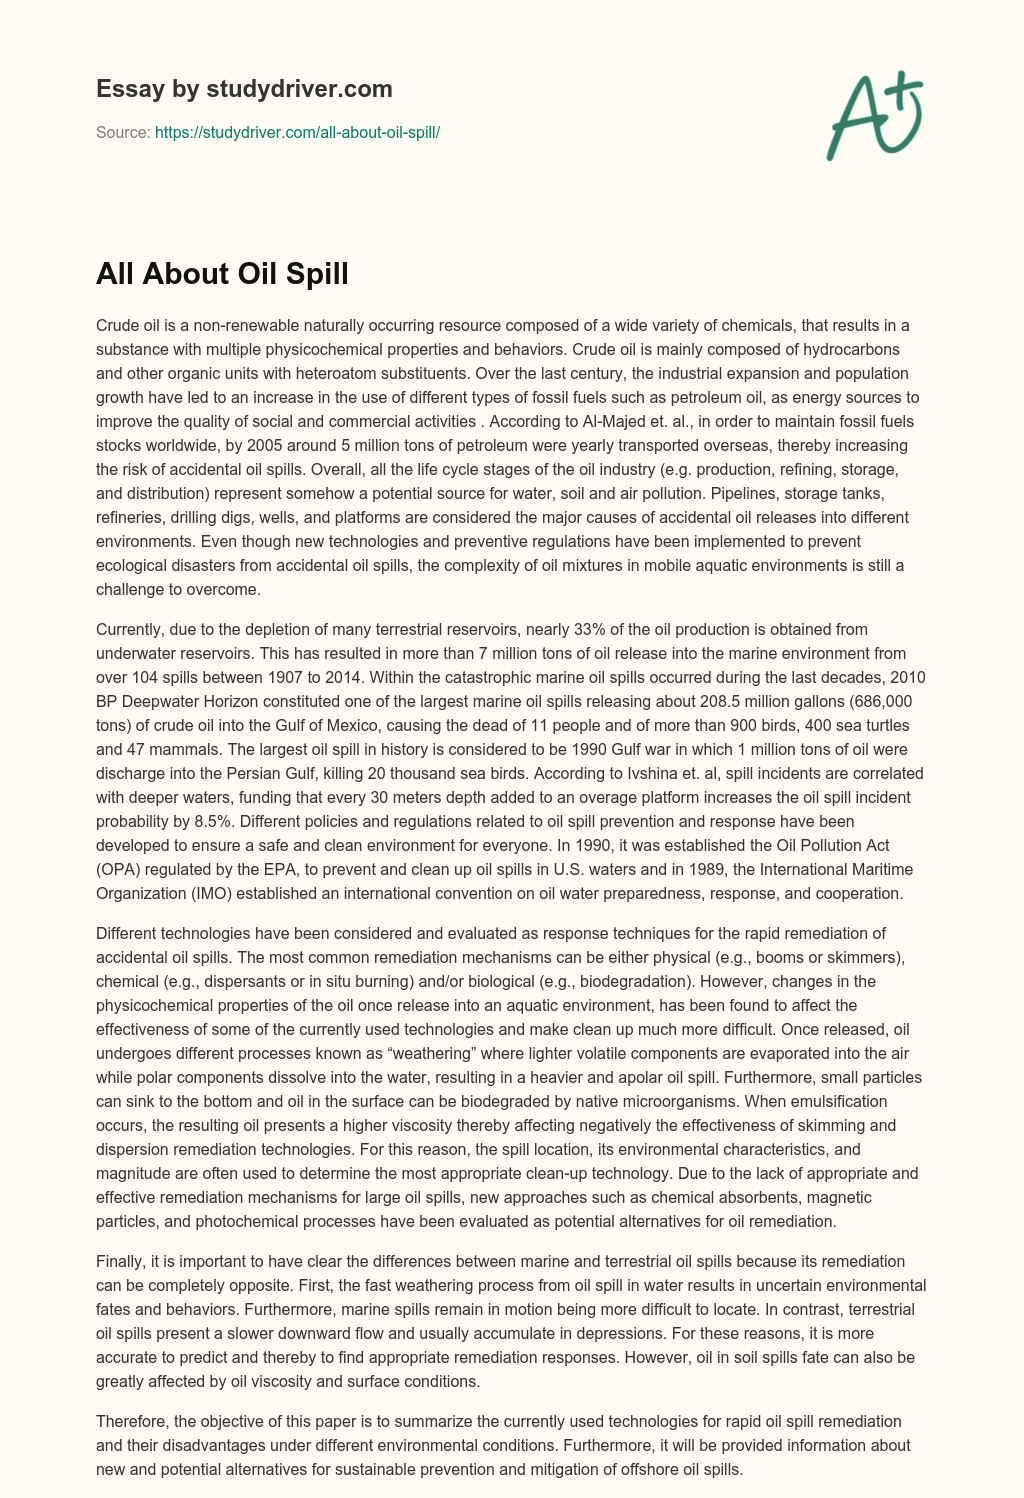 All about Oil Spill essay